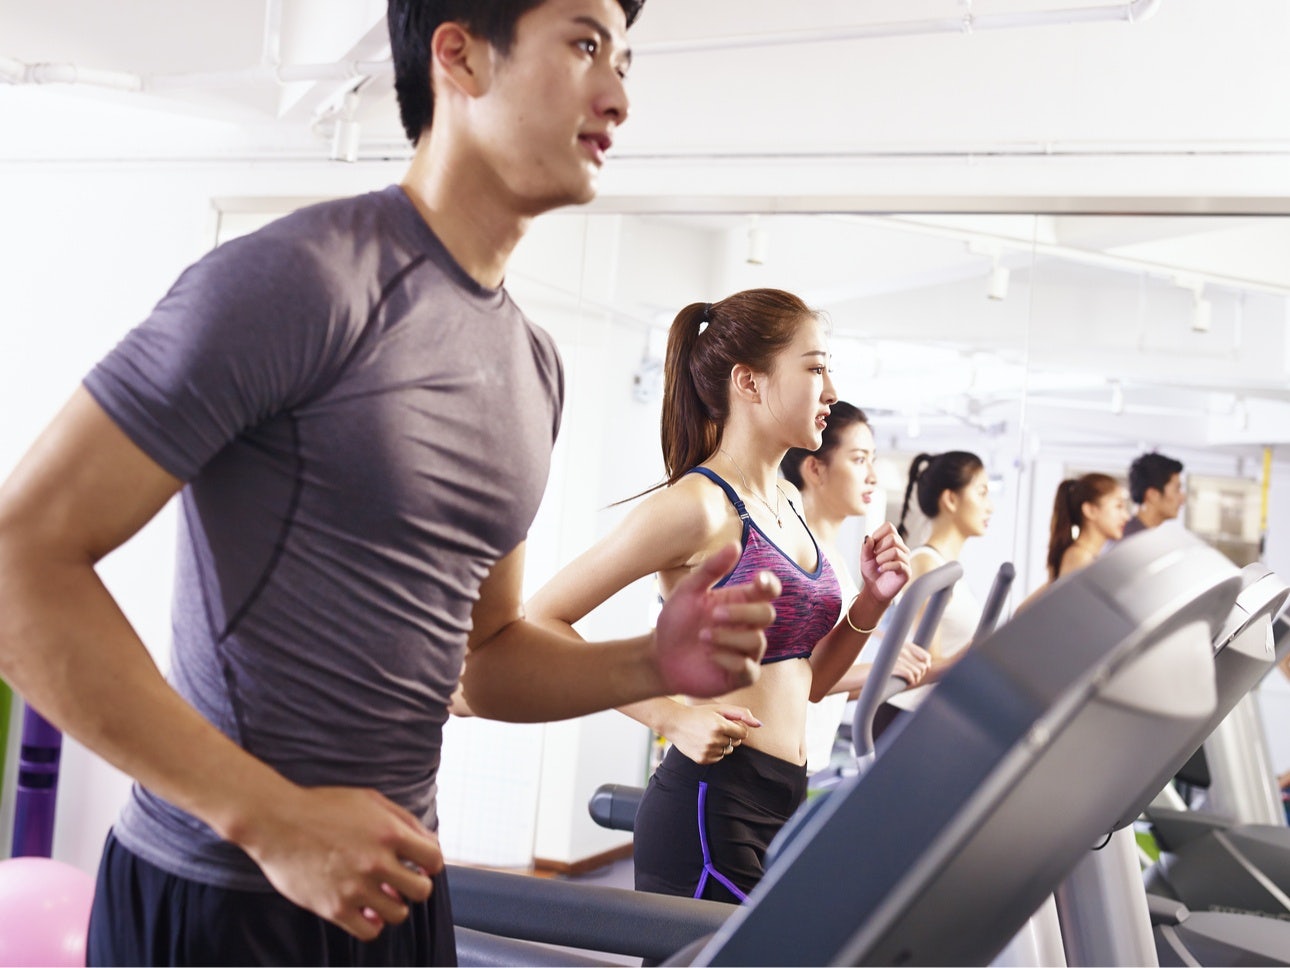 Secoo has partnered with Will's Gym to offer premium memberships to customers in China. Photo: Shutterstock